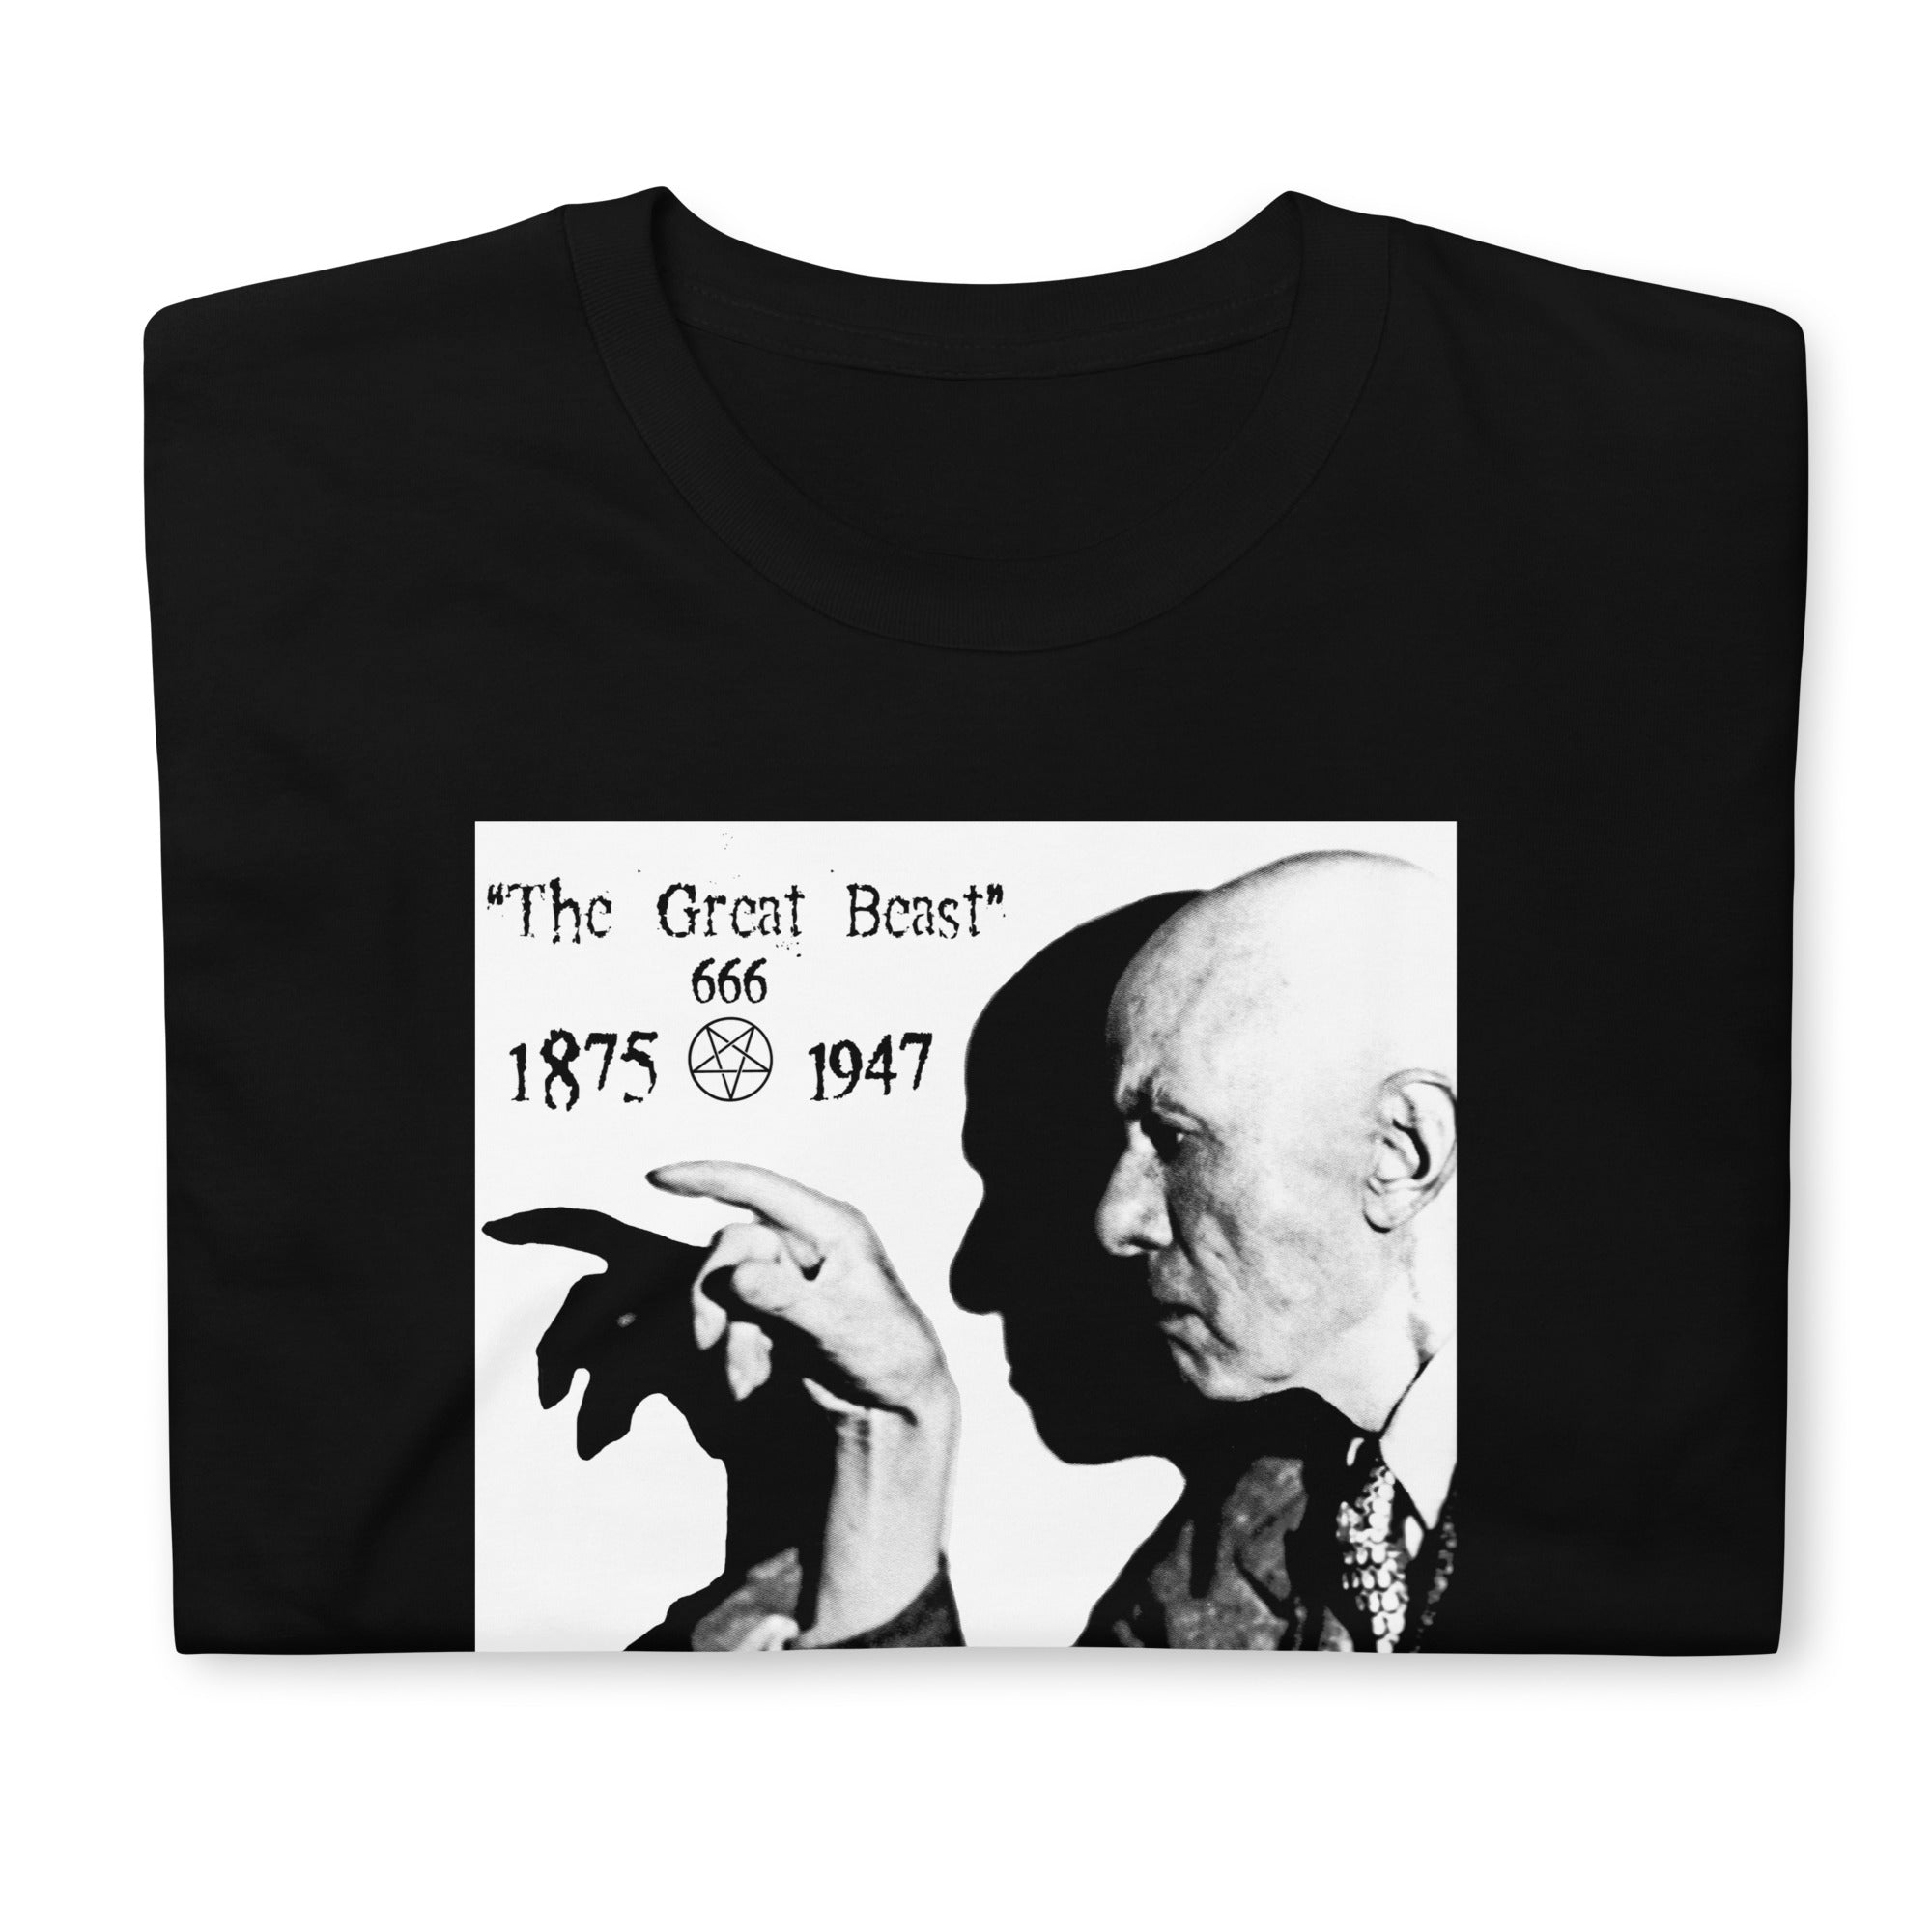 Aleister Crowley Infamous Occult Leader of Thelema Sex Magic Short Sleeve T-Shirt - Edge of Life Designs